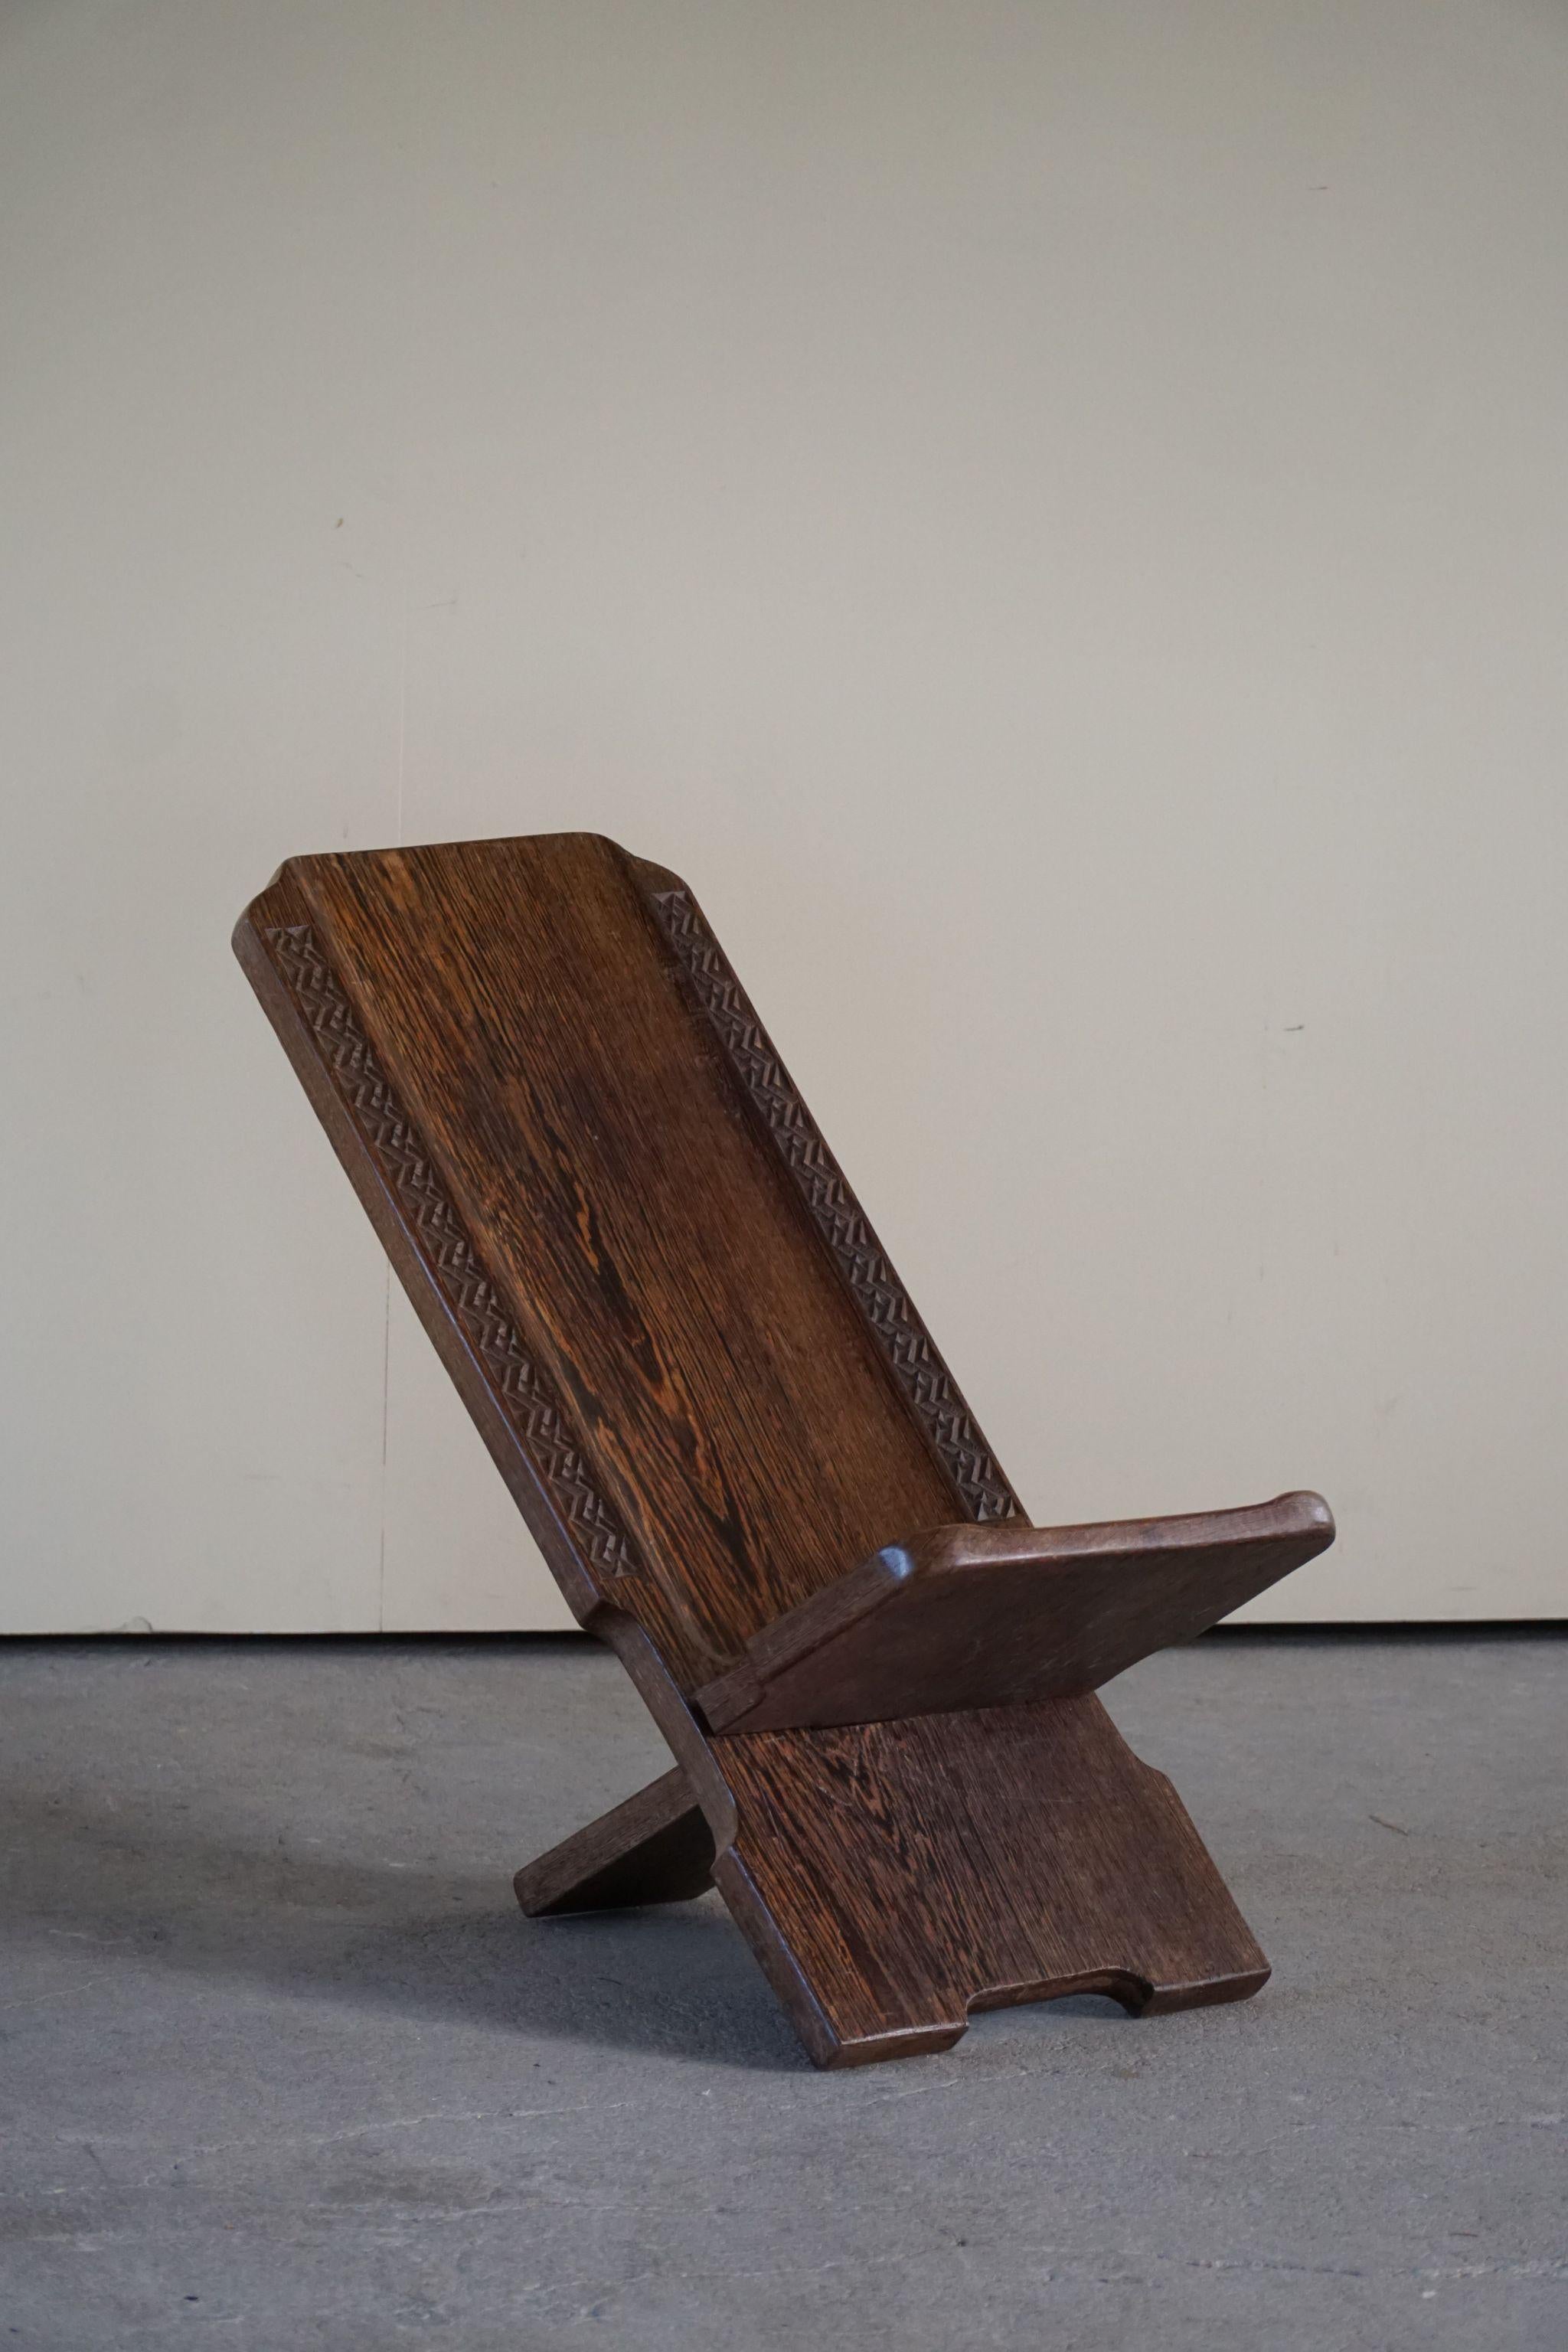 Primitive African Tribal Hand Carved Folding Palaver Chair, Wabi Sabi, 1970s For Sale 2